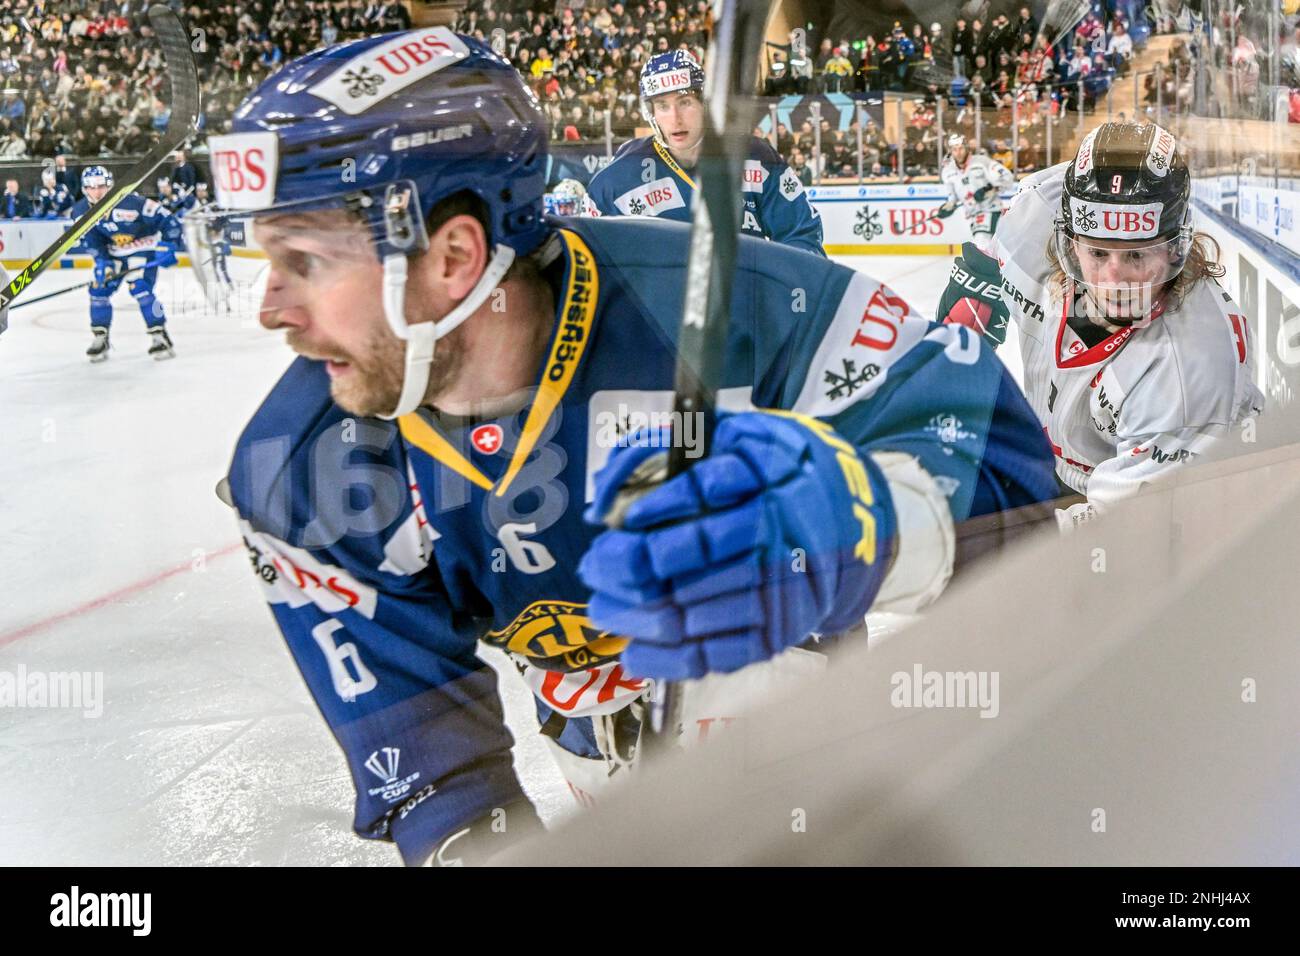 Davos Klas Dahlbeck, left, against Canadas Cody Eakin during the game between Switzerlands HC Davos and Team Canada, at the 94th Spengler Cup ice hockey tournament in Davos, Switzerland, Tuesday, Dec